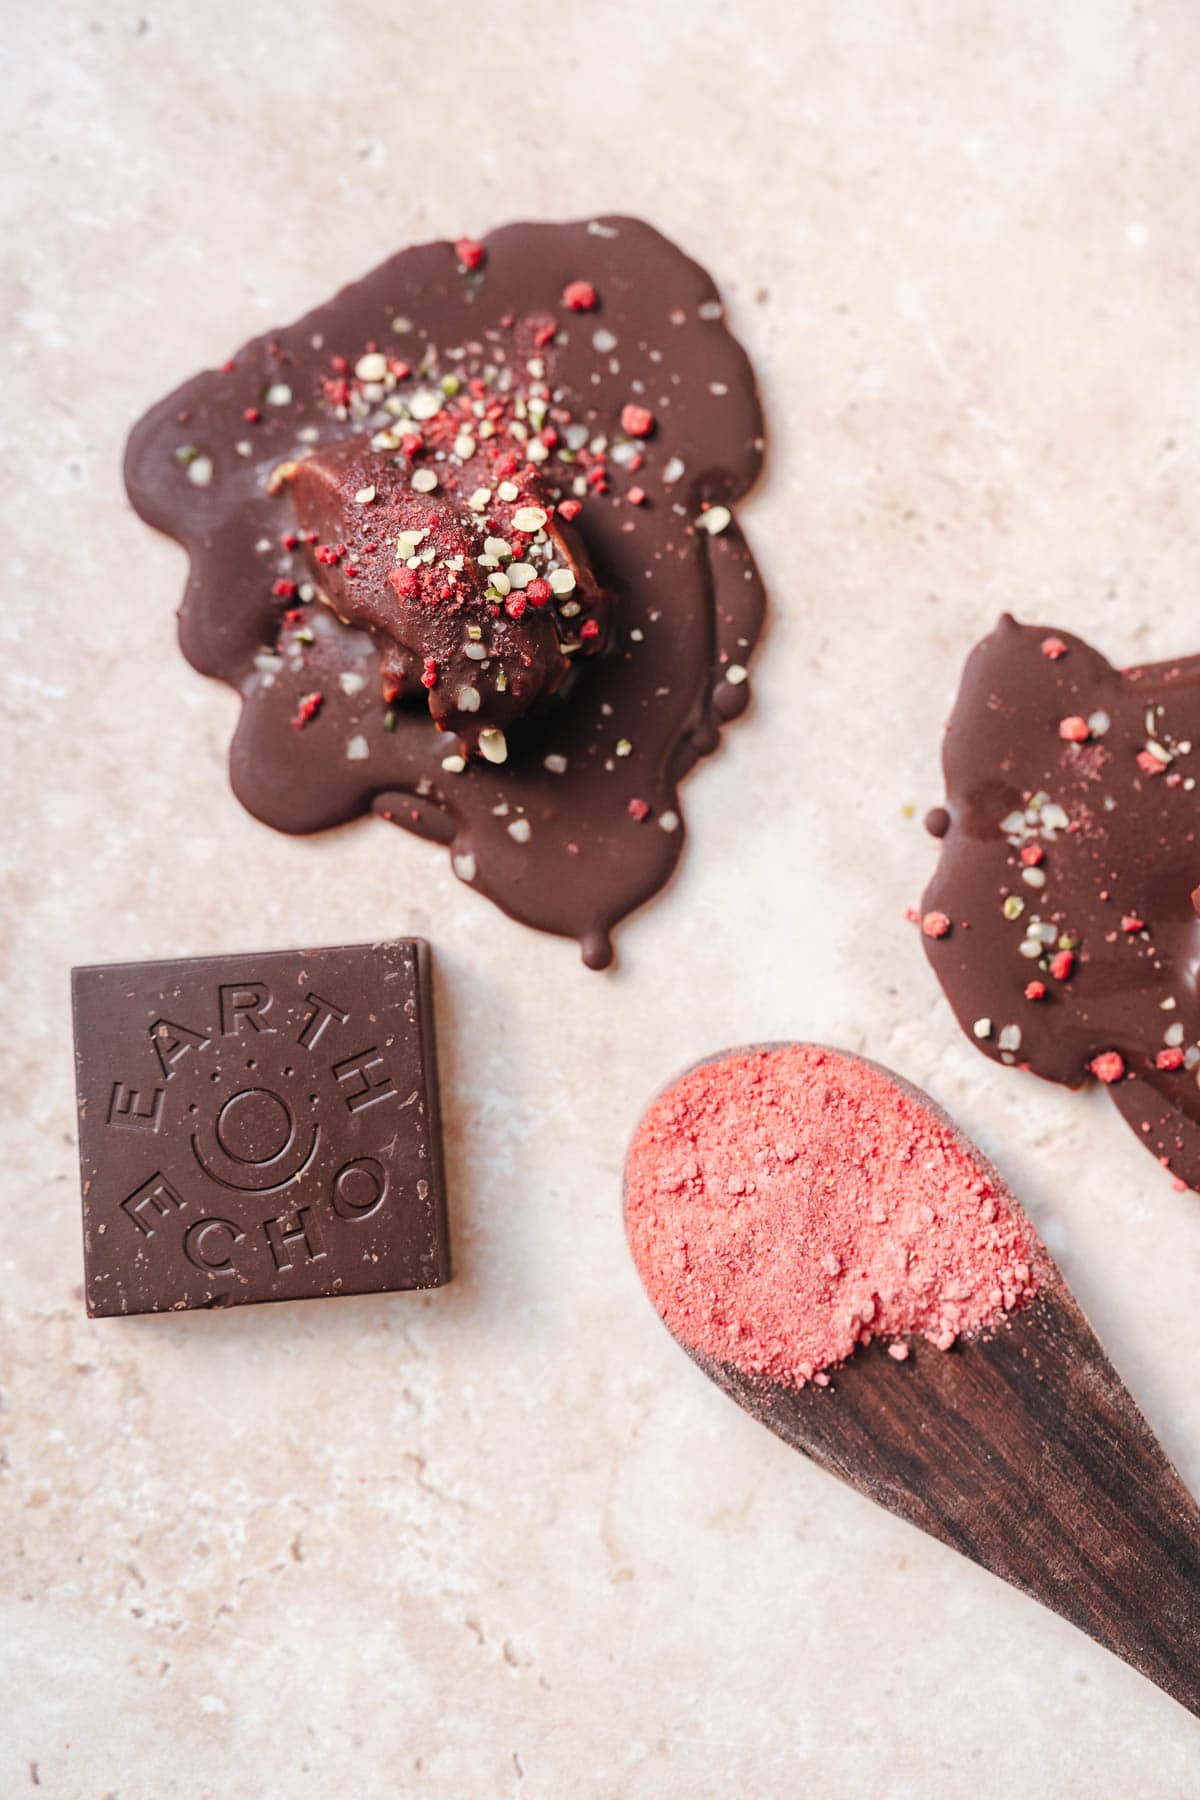 A wooden spoon of strawberry powder rests next to a small chocolate bar that says Earth Echo and homemade chocolate puddles.